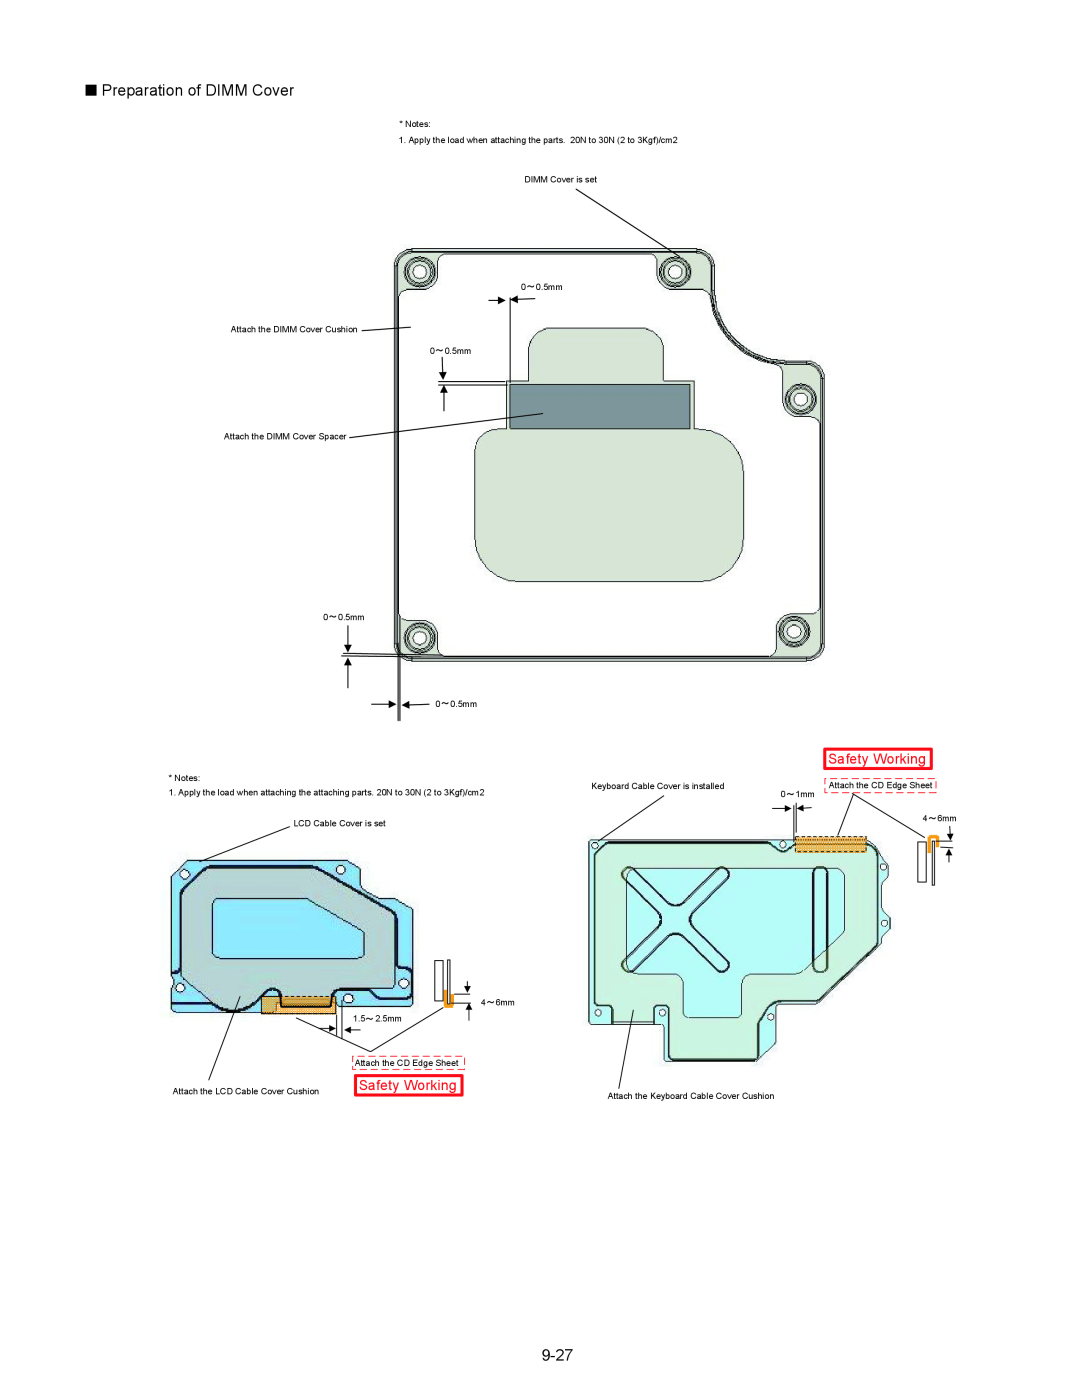 Matsushita CF-30 service manual Q Preparation of DIMM Cover, 9-27, Safety Working, Attach the Keyboard Cable Cover Cushion 